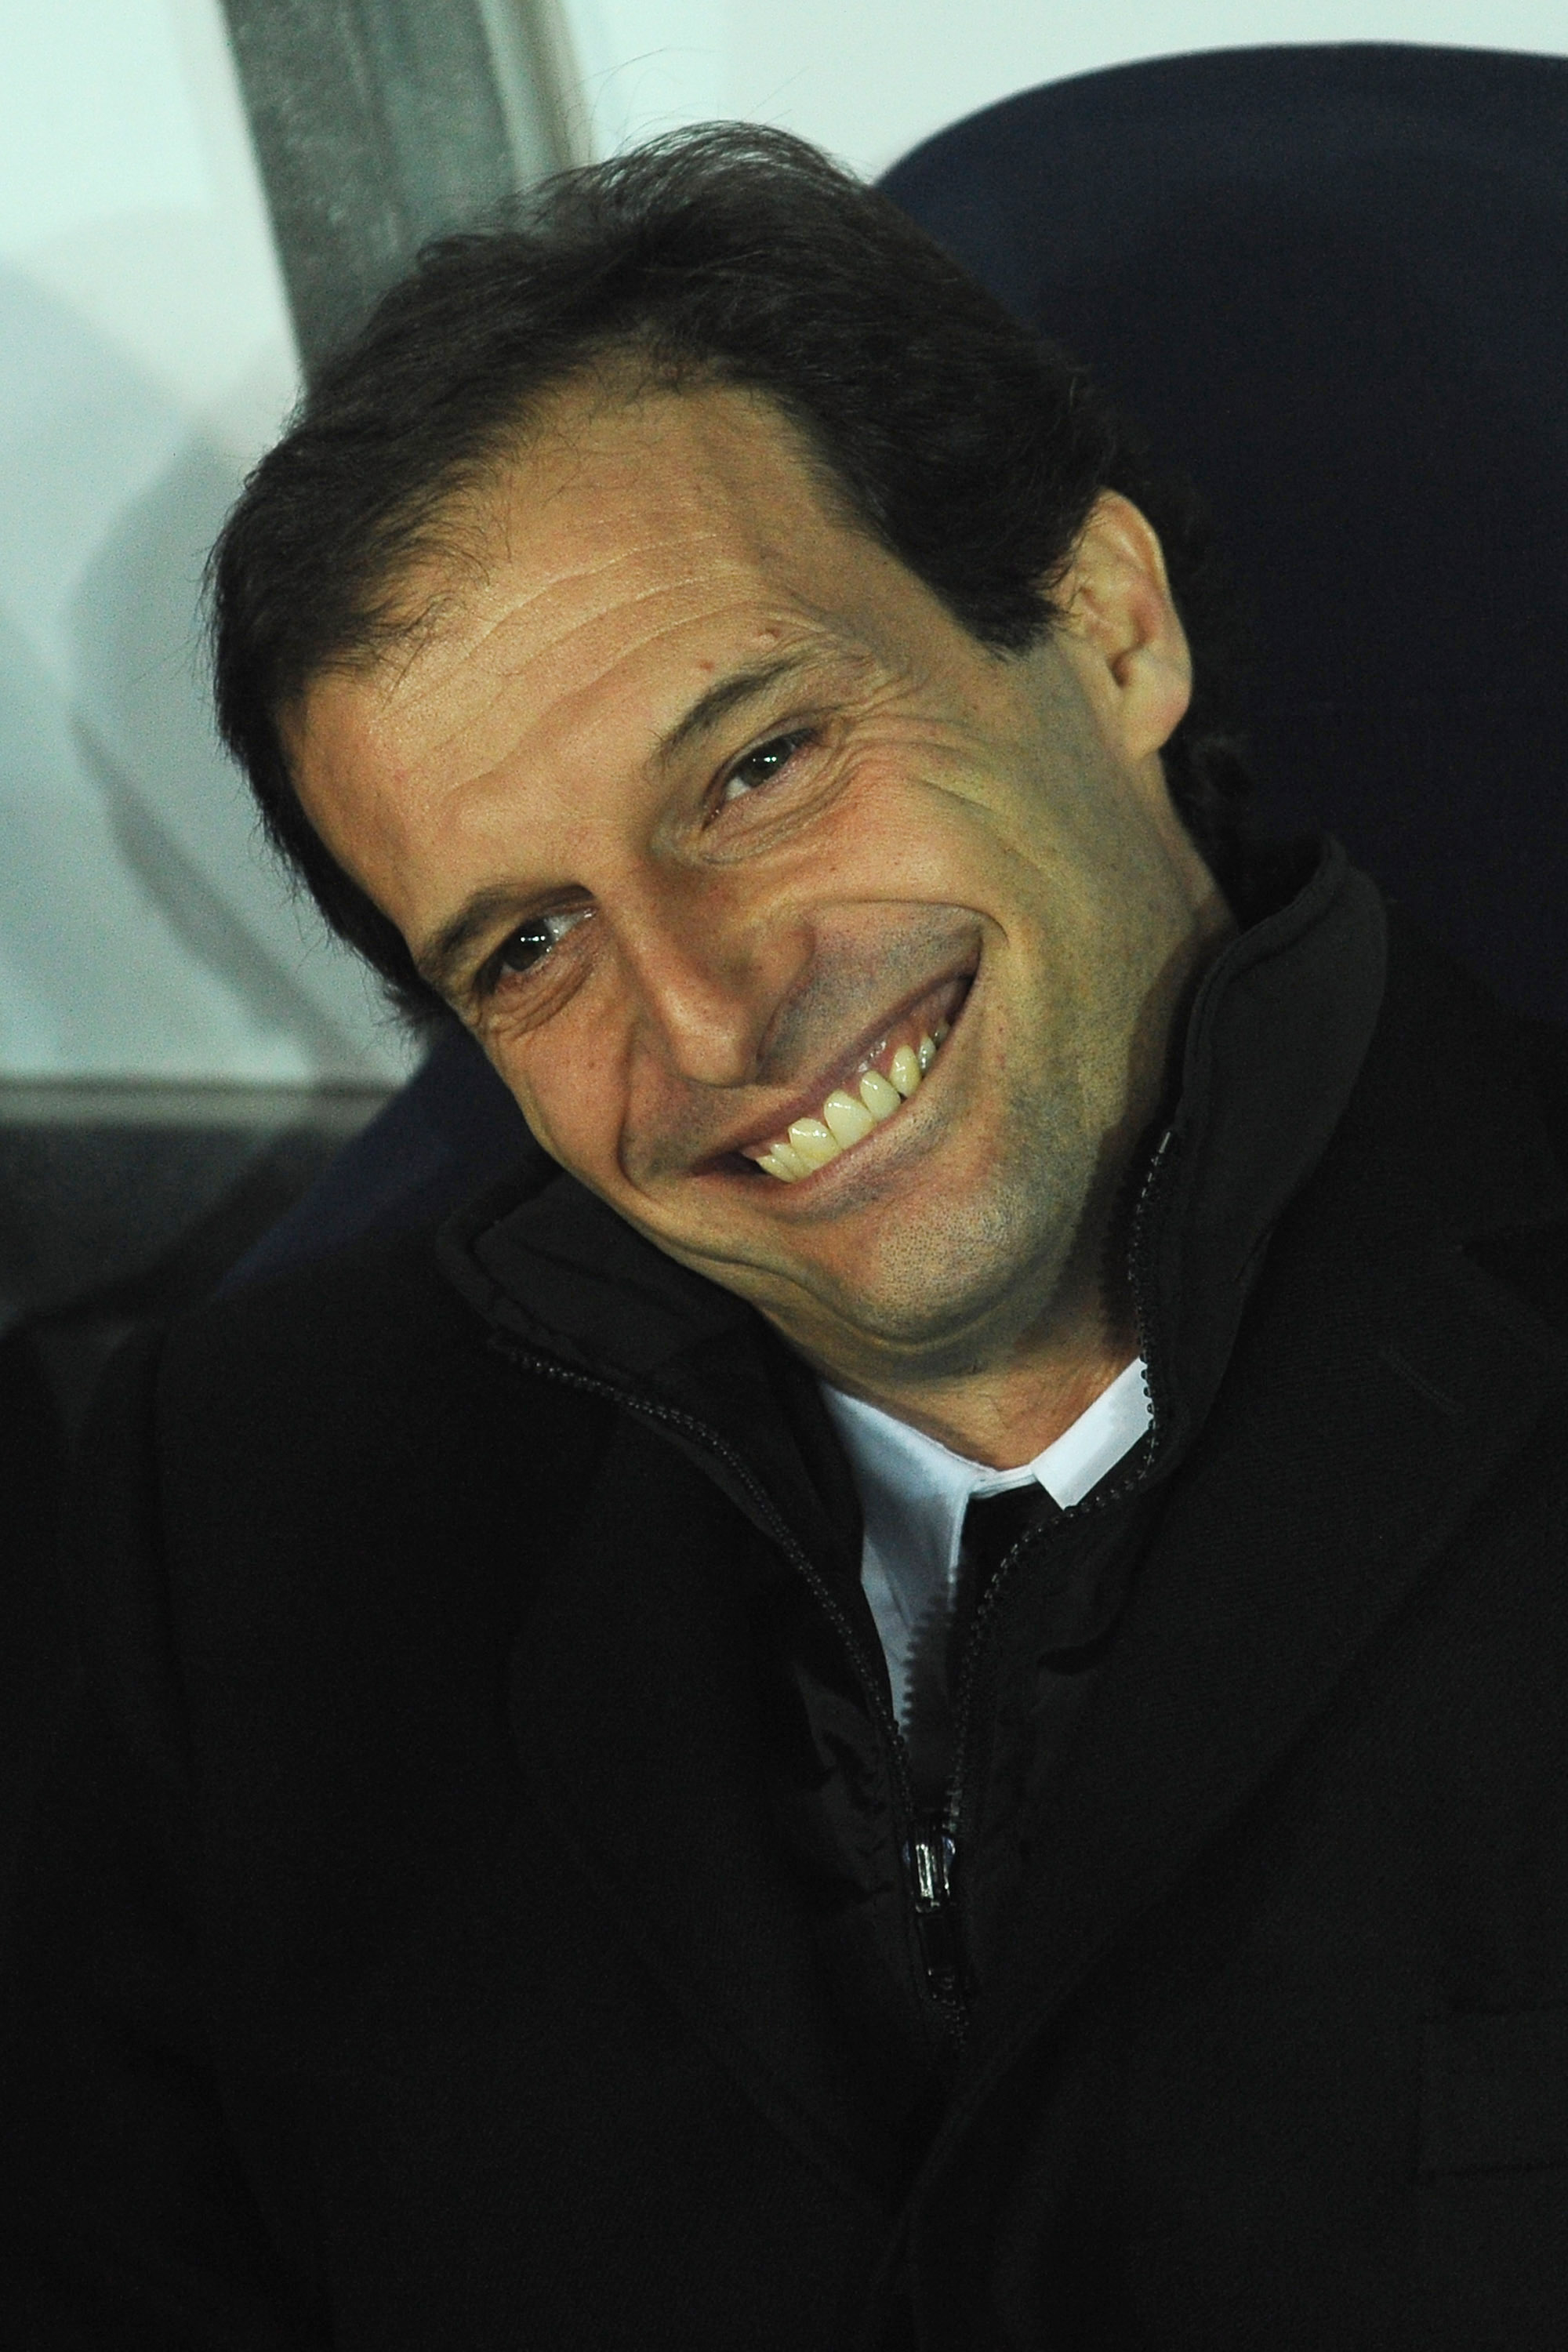 TURIN, ITALY - MARCH 05:  AC Milan head coach Massimiliano Allegri smiles prior to the Serie A match between Juventus FC and AC Milan at Olimpico Stadium on March 5, 2011 in Turin, Italy.  (Photo by Valerio Pennicino/Getty Images)